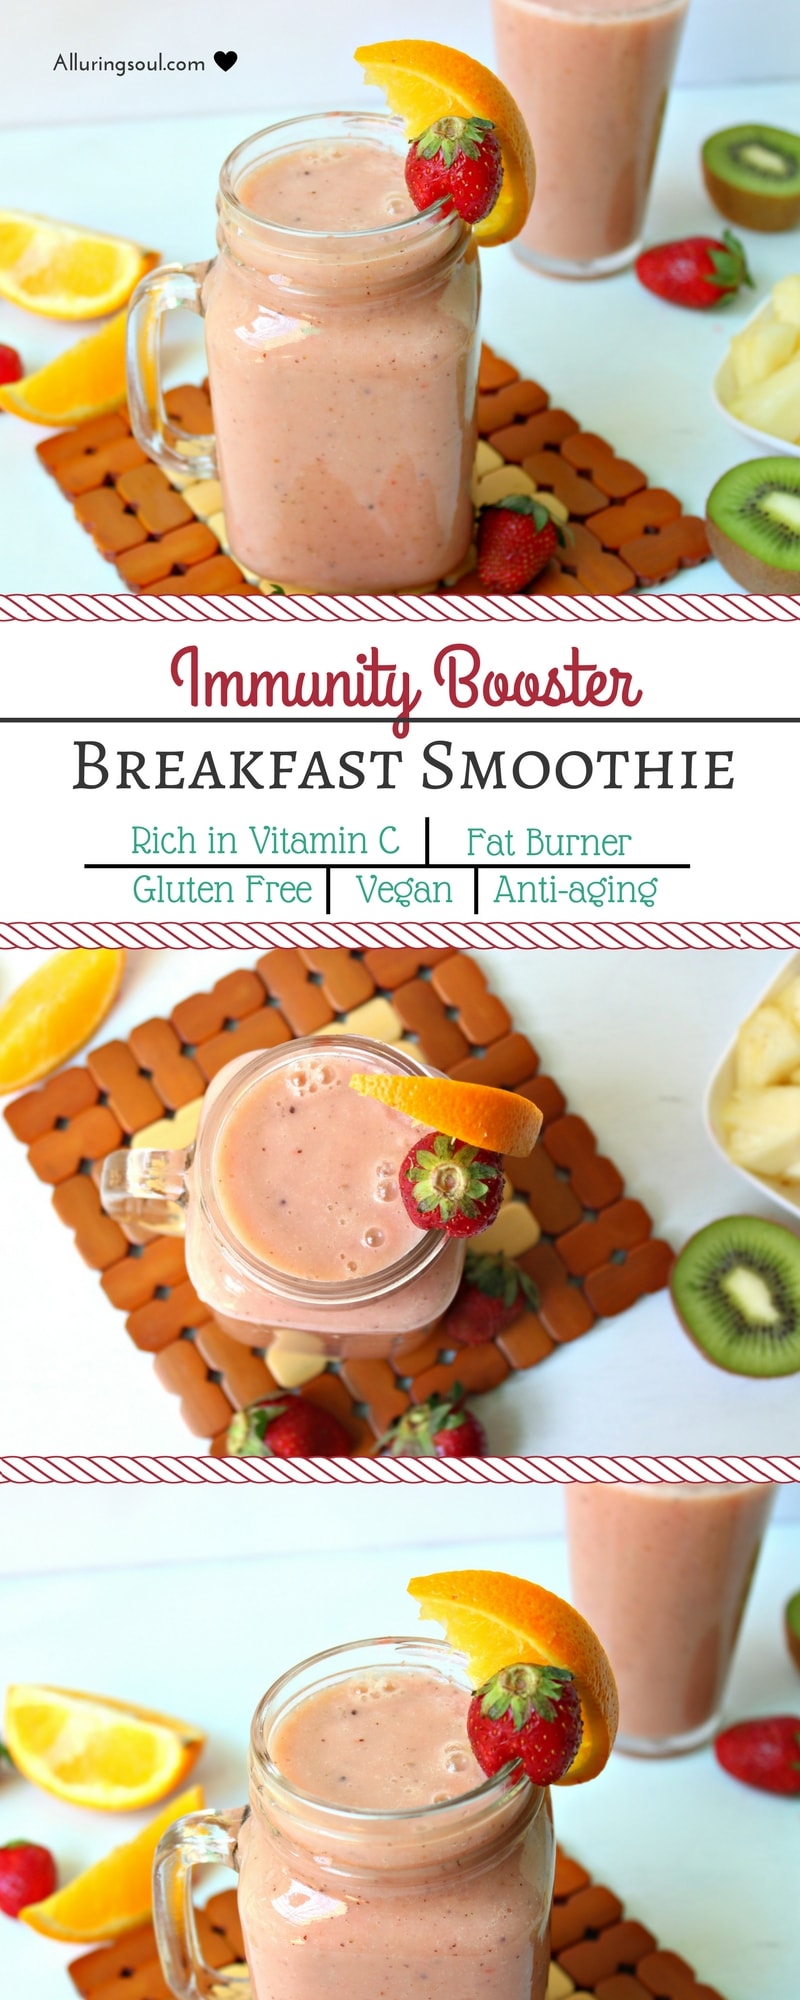 Fat burner and immune booster breakfast smoothie